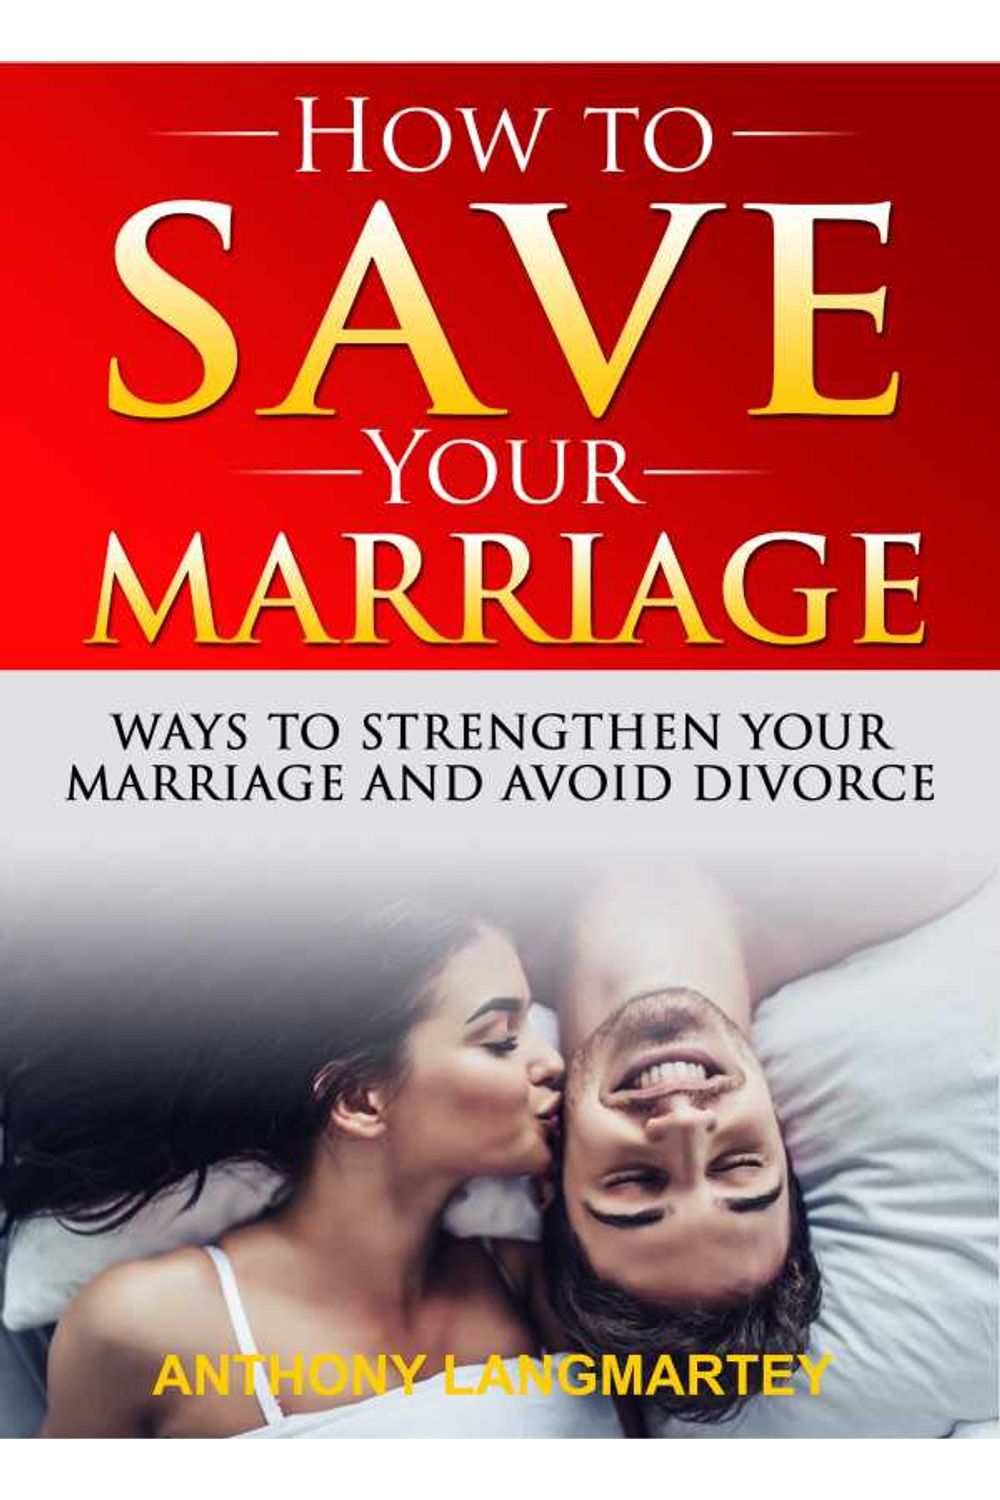 bw-how-to-save-your-marriage-the-spirit-and-truth-9783985515875